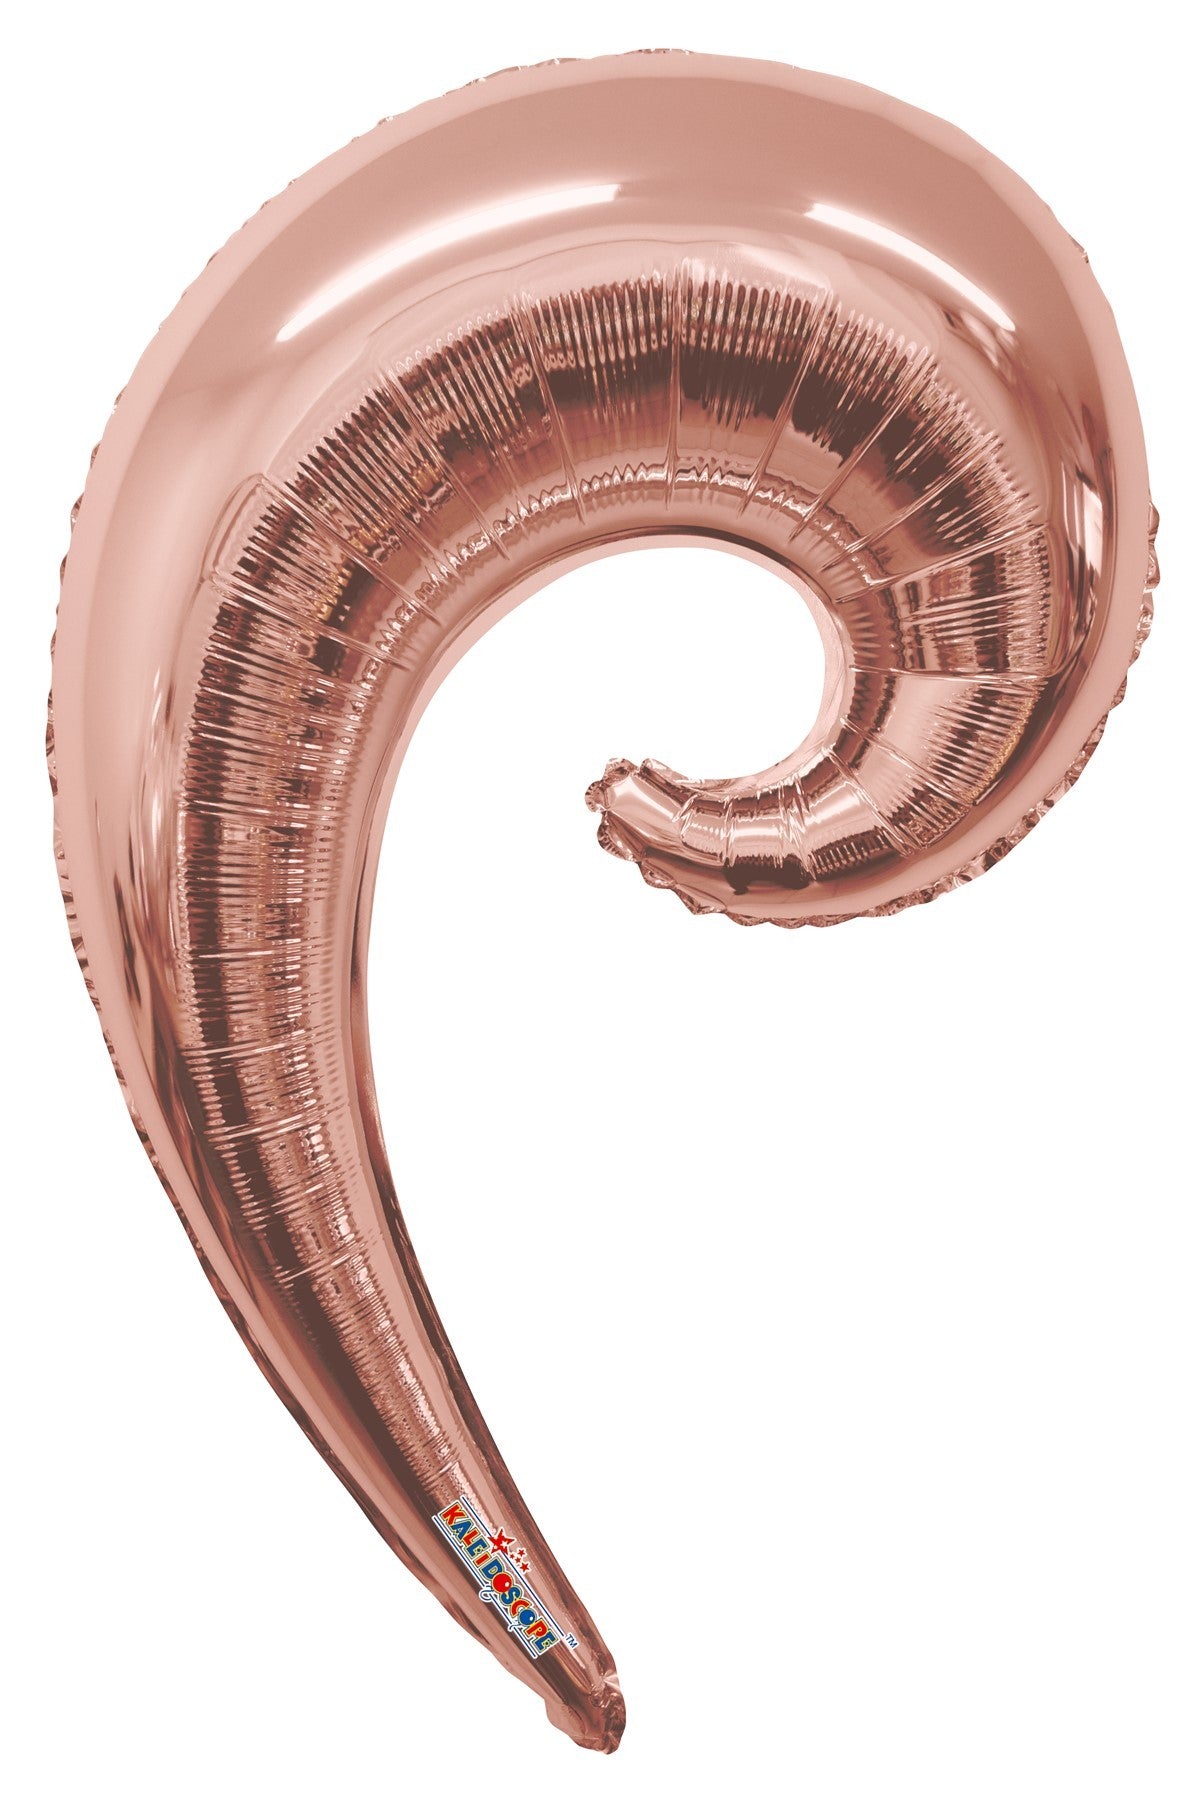 View Rose Gold Wave Balloon 36 inch information